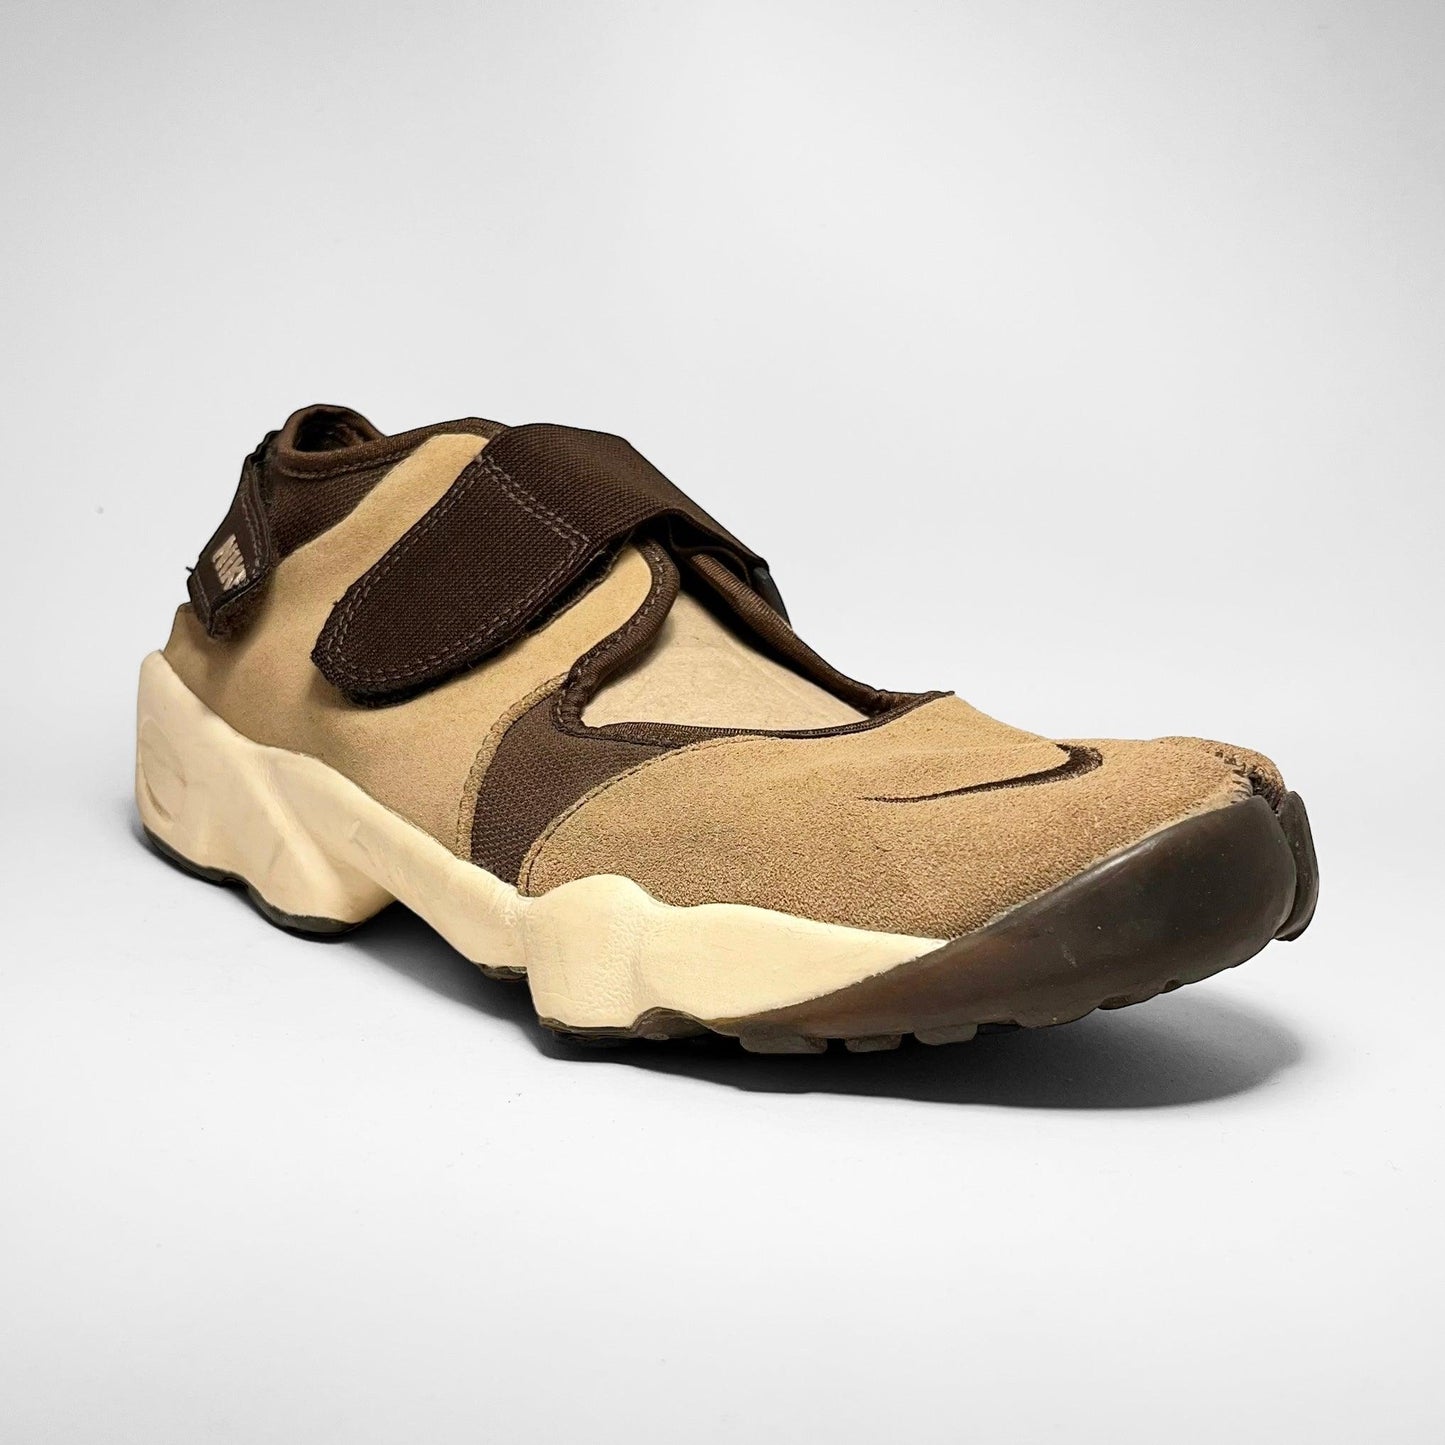 Nike Air Rift Suede (2003) - Known Source